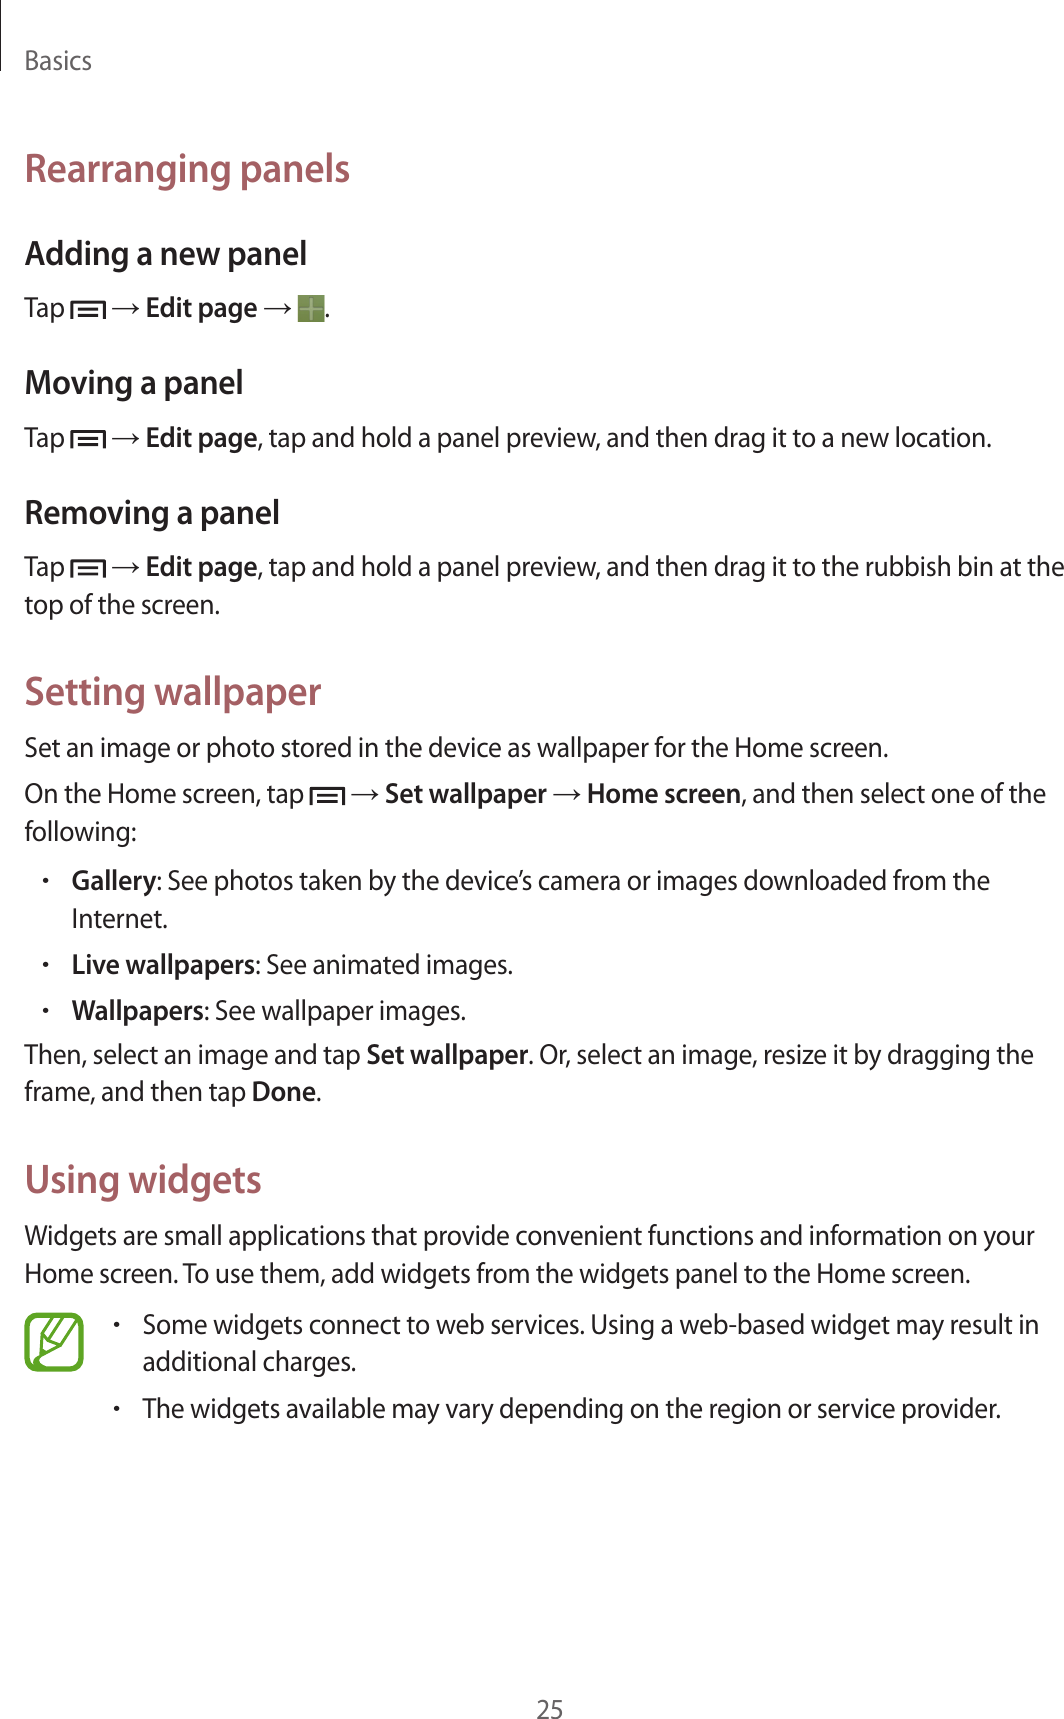 Basics25Rearranging panelsAdding a new panelTap   → Edit page →  .Moving a panelTap   → Edit page, tap and hold a panel preview, and then drag it to a new location.Removing a panelTap   → Edit page, tap and hold a panel preview, and then drag it to the rubbish bin at the top of the screen.Setting wallpaperSet an image or photo stored in the device as wallpaper for the Home screen.On the Home screen, tap   → Set wallpaper → Home screen, and then select one of the following:•Gallery: See photos taken by the device’s camera or images downloaded from the Internet.•Live wallpapers: See animated images.•Wallpapers: See wallpaper images.Then, select an image and tap Set wallpaper. Or, select an image, resize it by dragging the frame, and then tap Done.Using widgetsWidgets are small applications that provide convenient functions and information on your Home screen. To use them, add widgets from the widgets panel to the Home screen.•Some widgets connect to web services. Using a web-based widget may result in additional charges.•The widgets available may vary depending on the region or service provider.